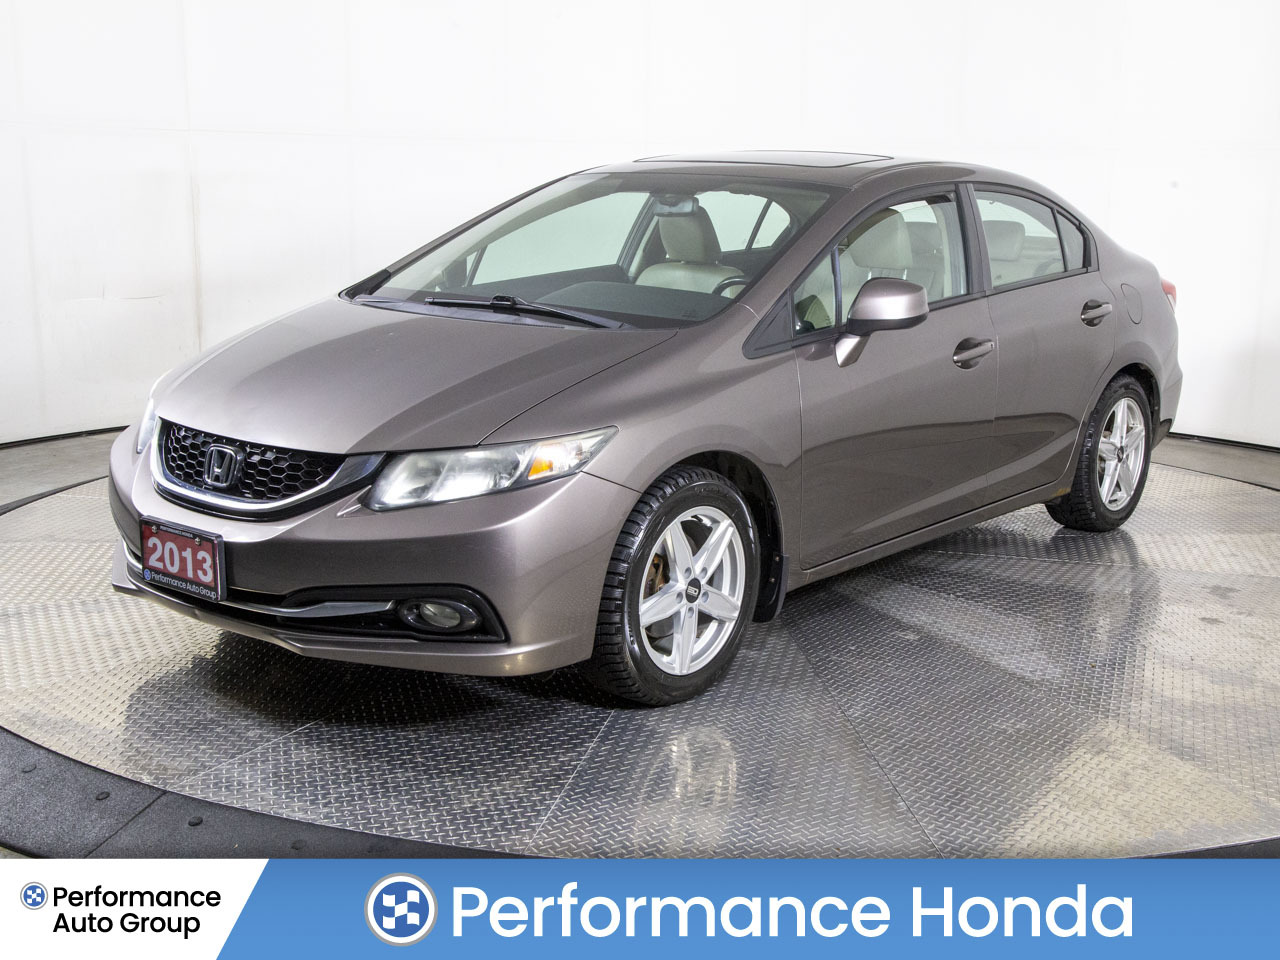 2013 Honda Civic 4dr Auto Touring | SOLD SOLD SOLD SOLD!!!